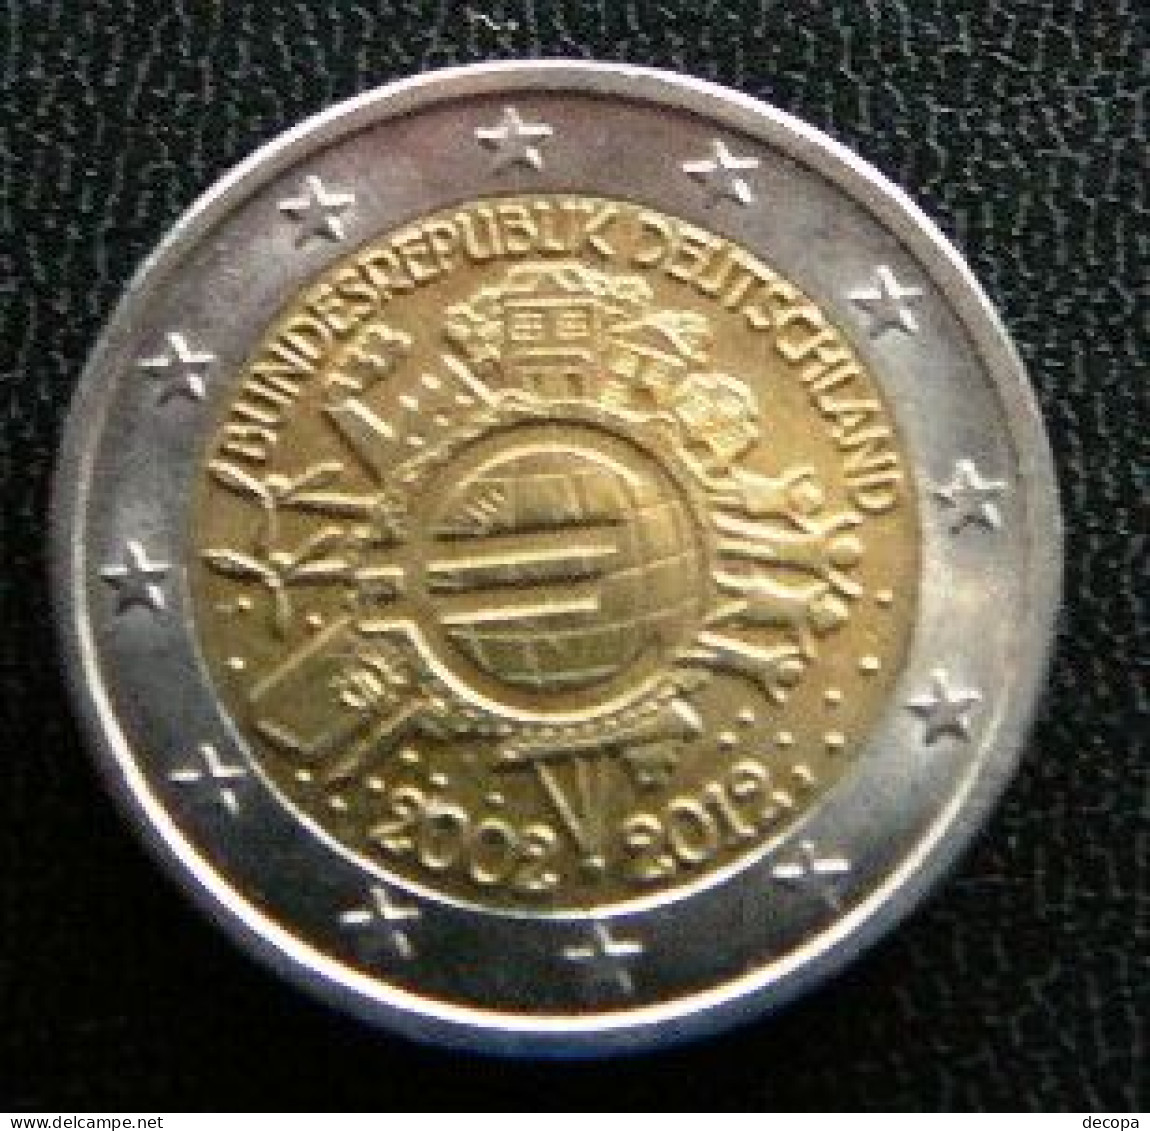 Germany - Allemagne - Duitsland   2 EURO 2012 J   10 Years Euro      Speciale Uitgave - Commemorative - Duitsland